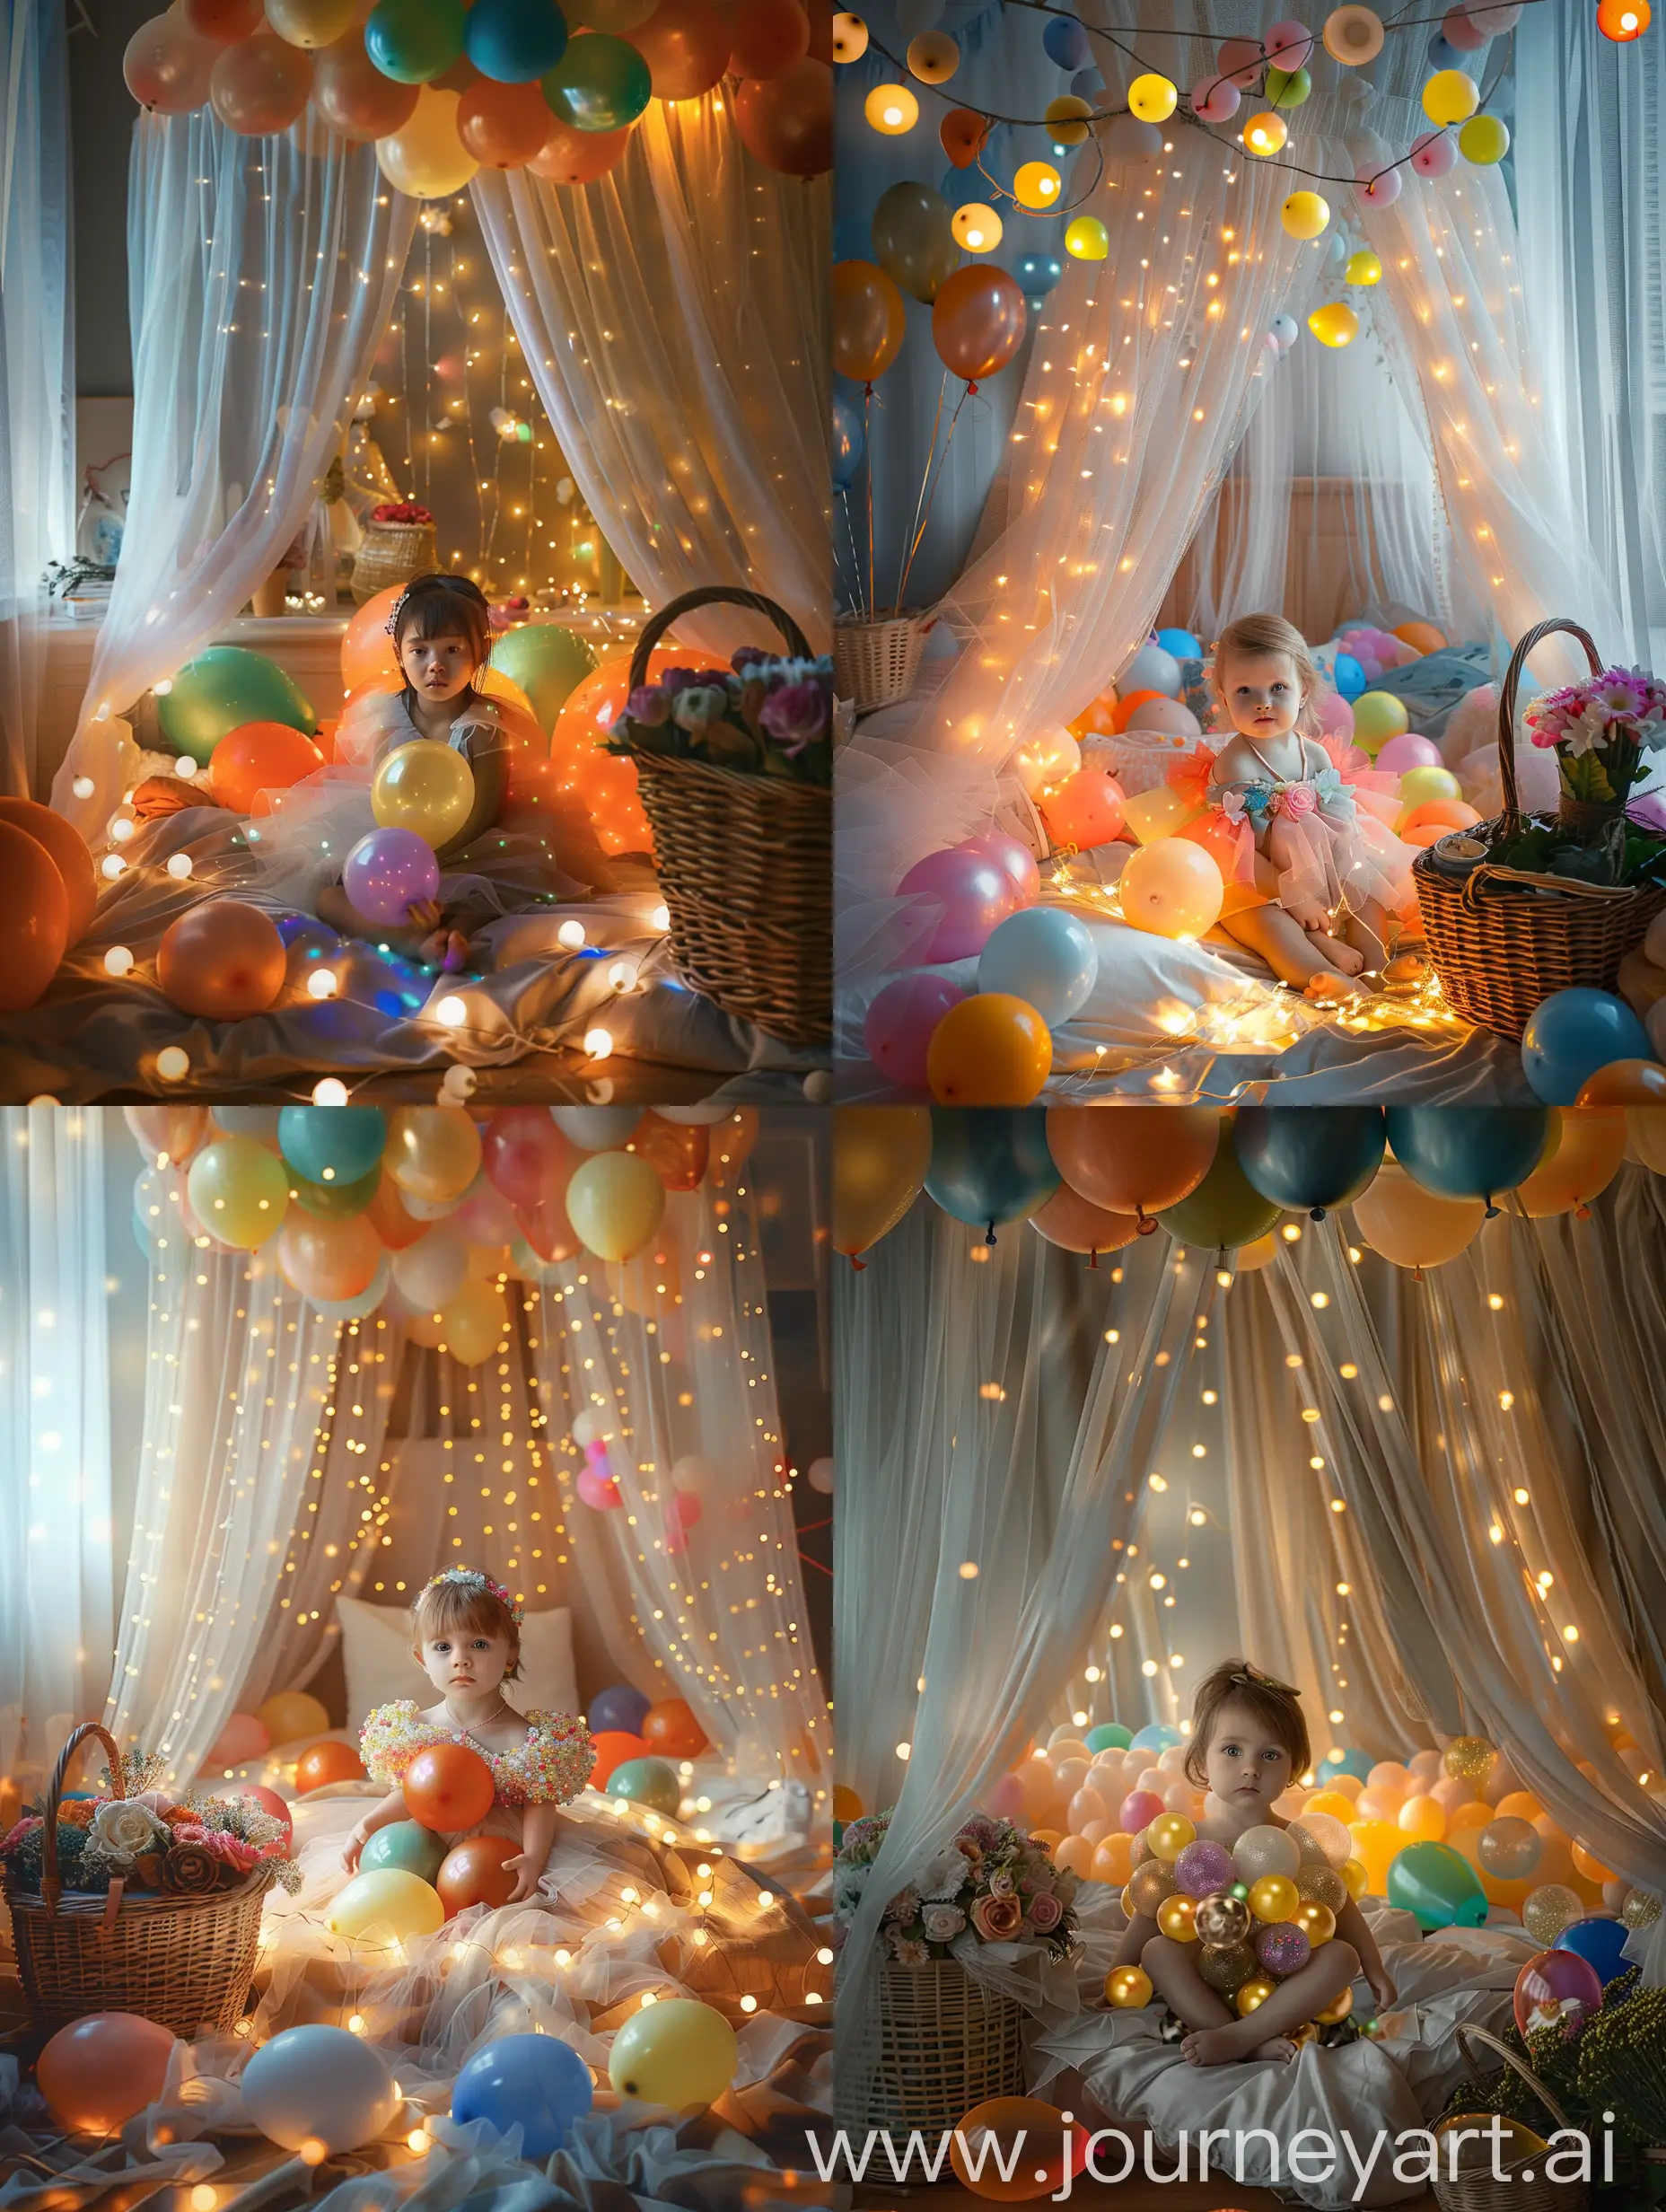 Adorable-Child-in-Balloon-Dress-Surrounded-by-Glowing-Lights-and-Flowers